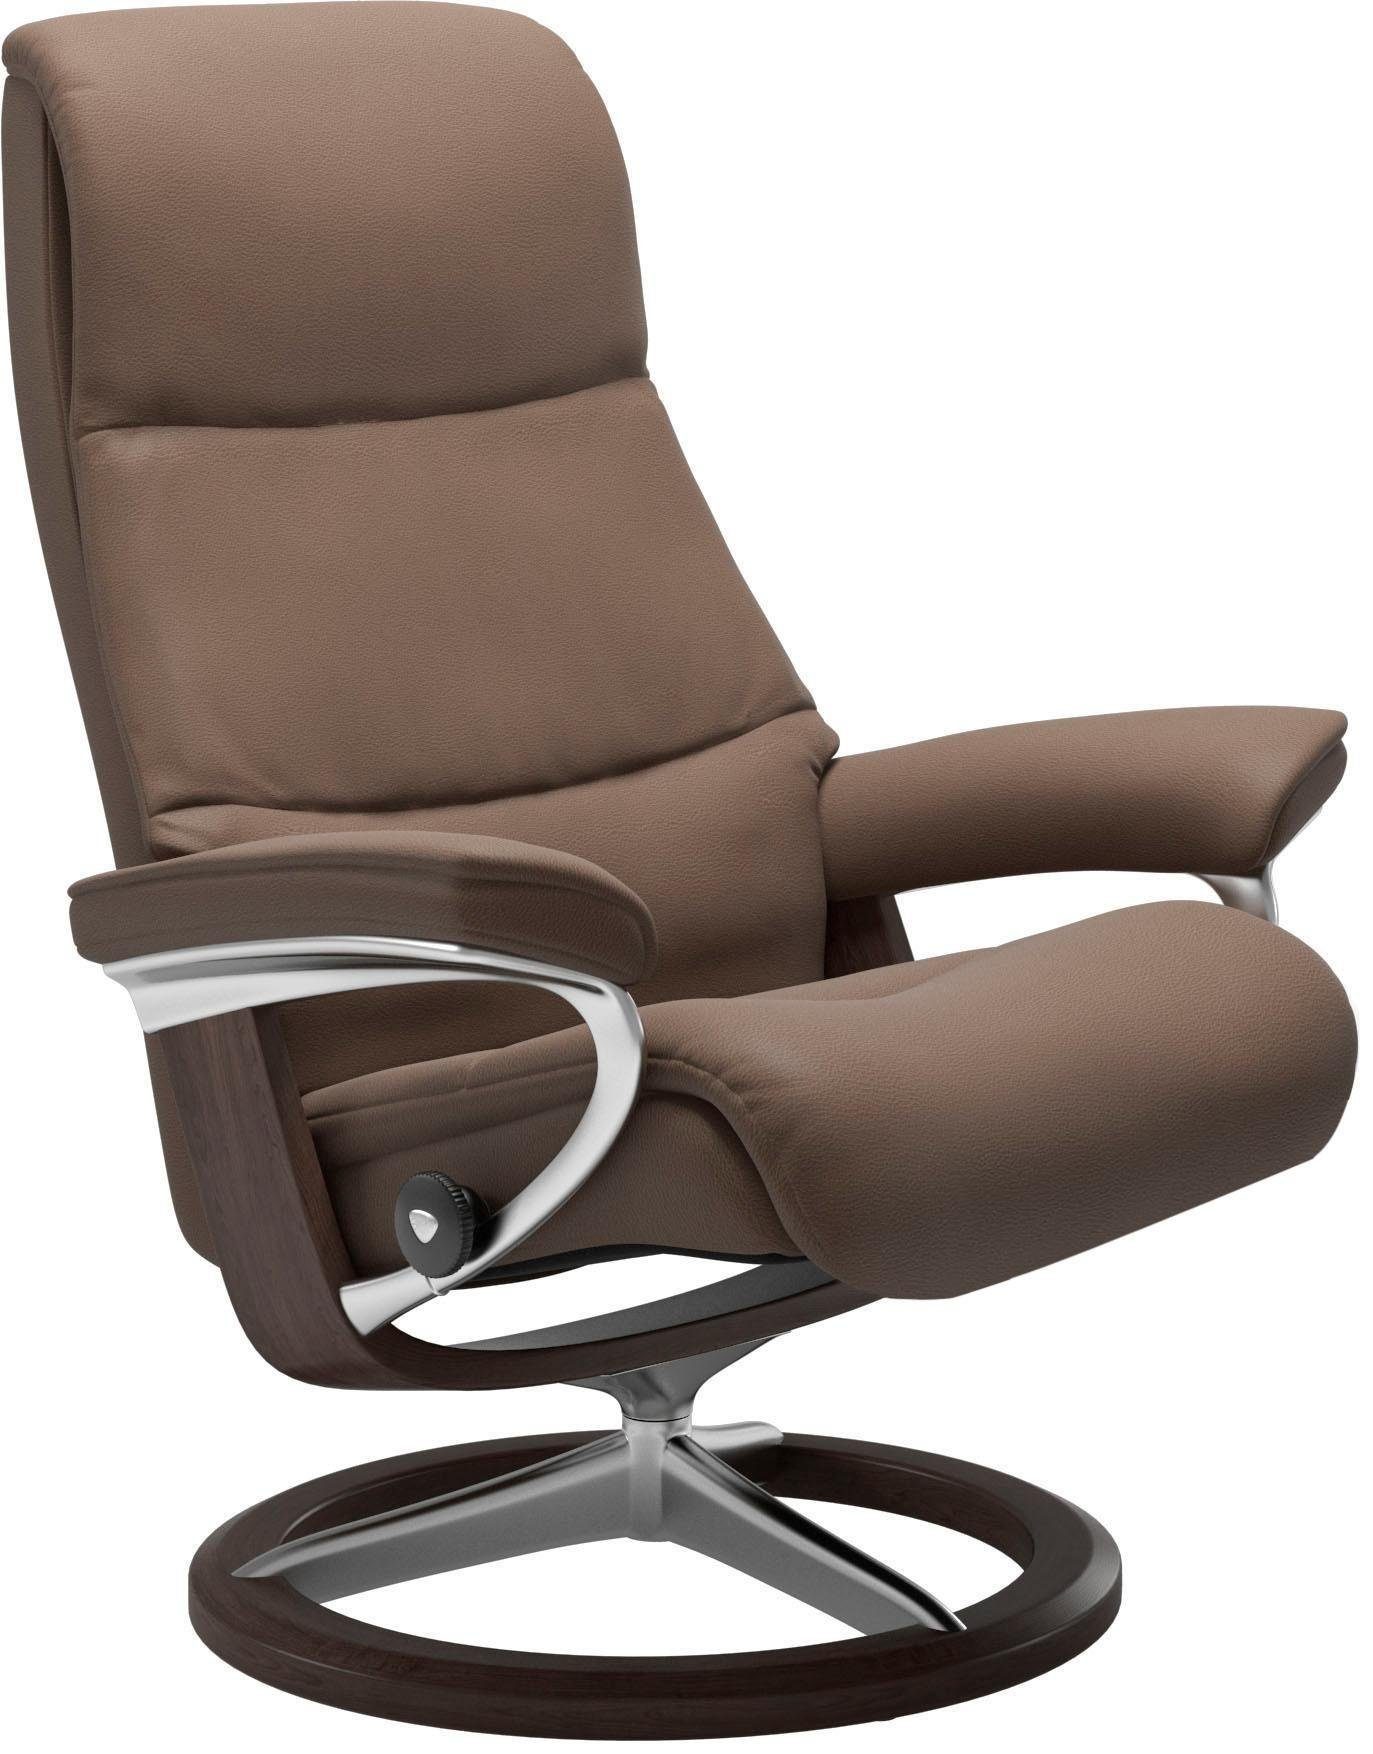 Stressless® Relaxsessel Größe View, Signature L,Gestell Wenge Base, mit